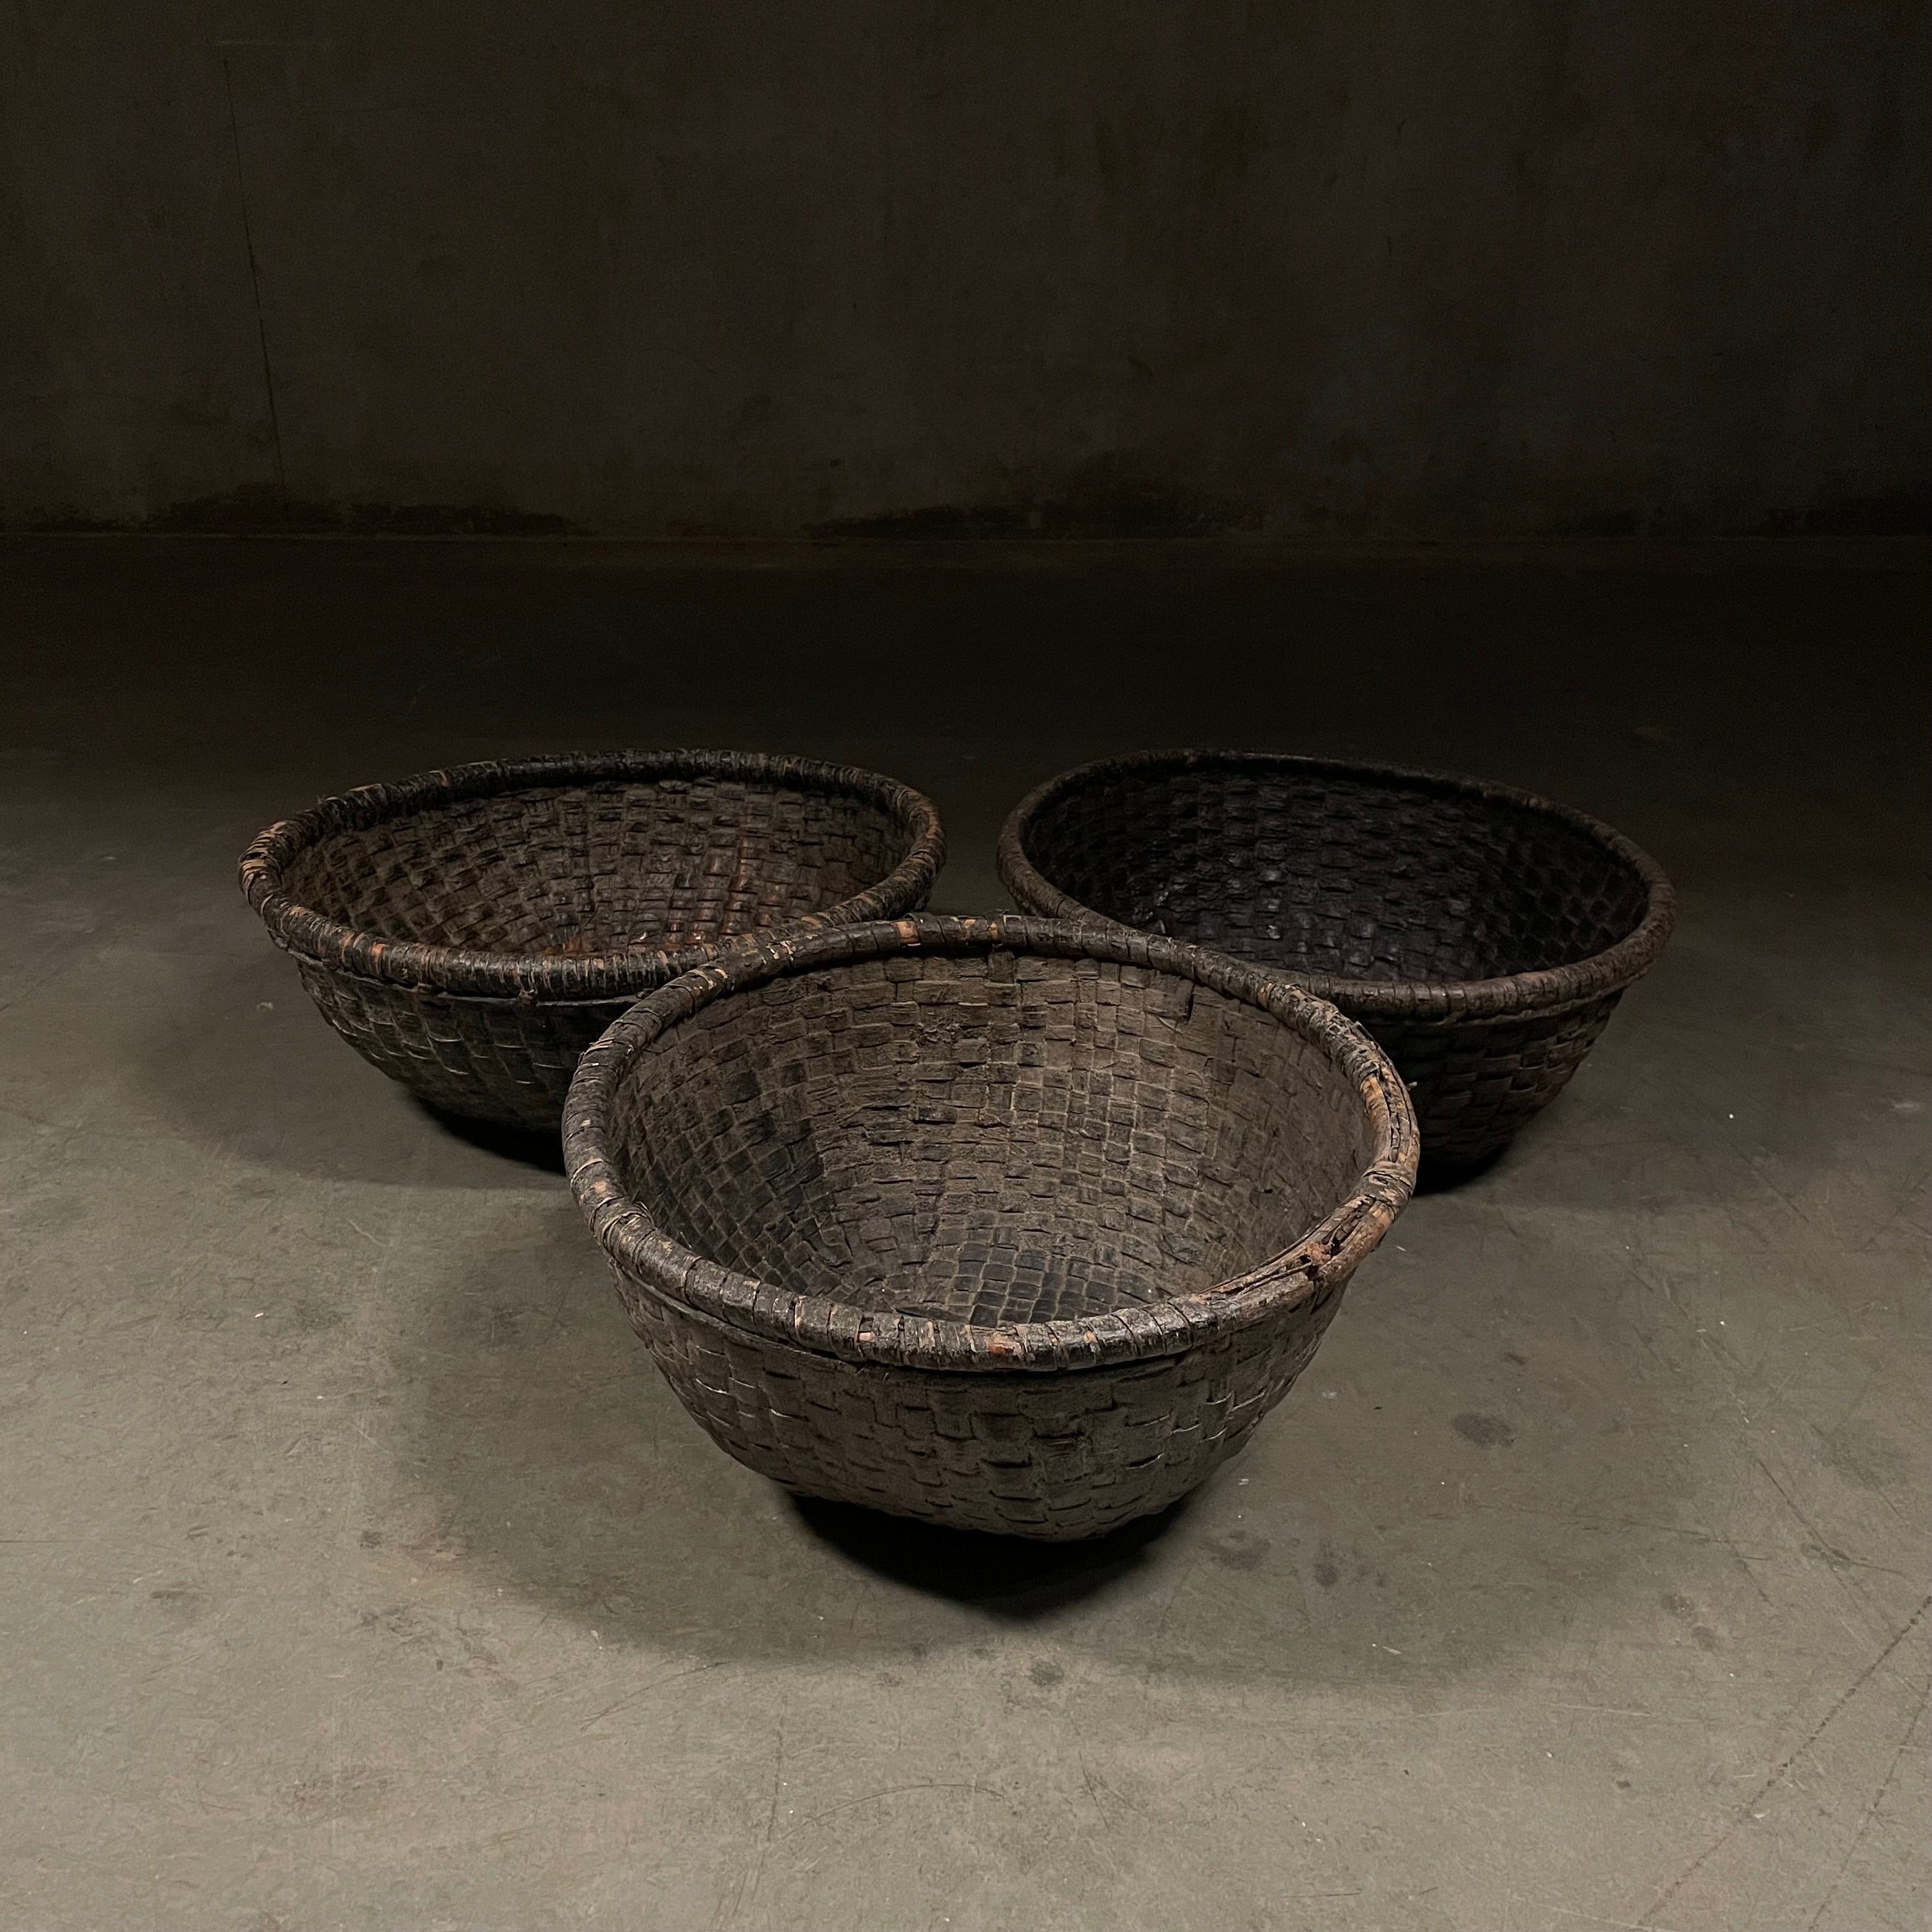 Antique Harvest Baskets from Asia